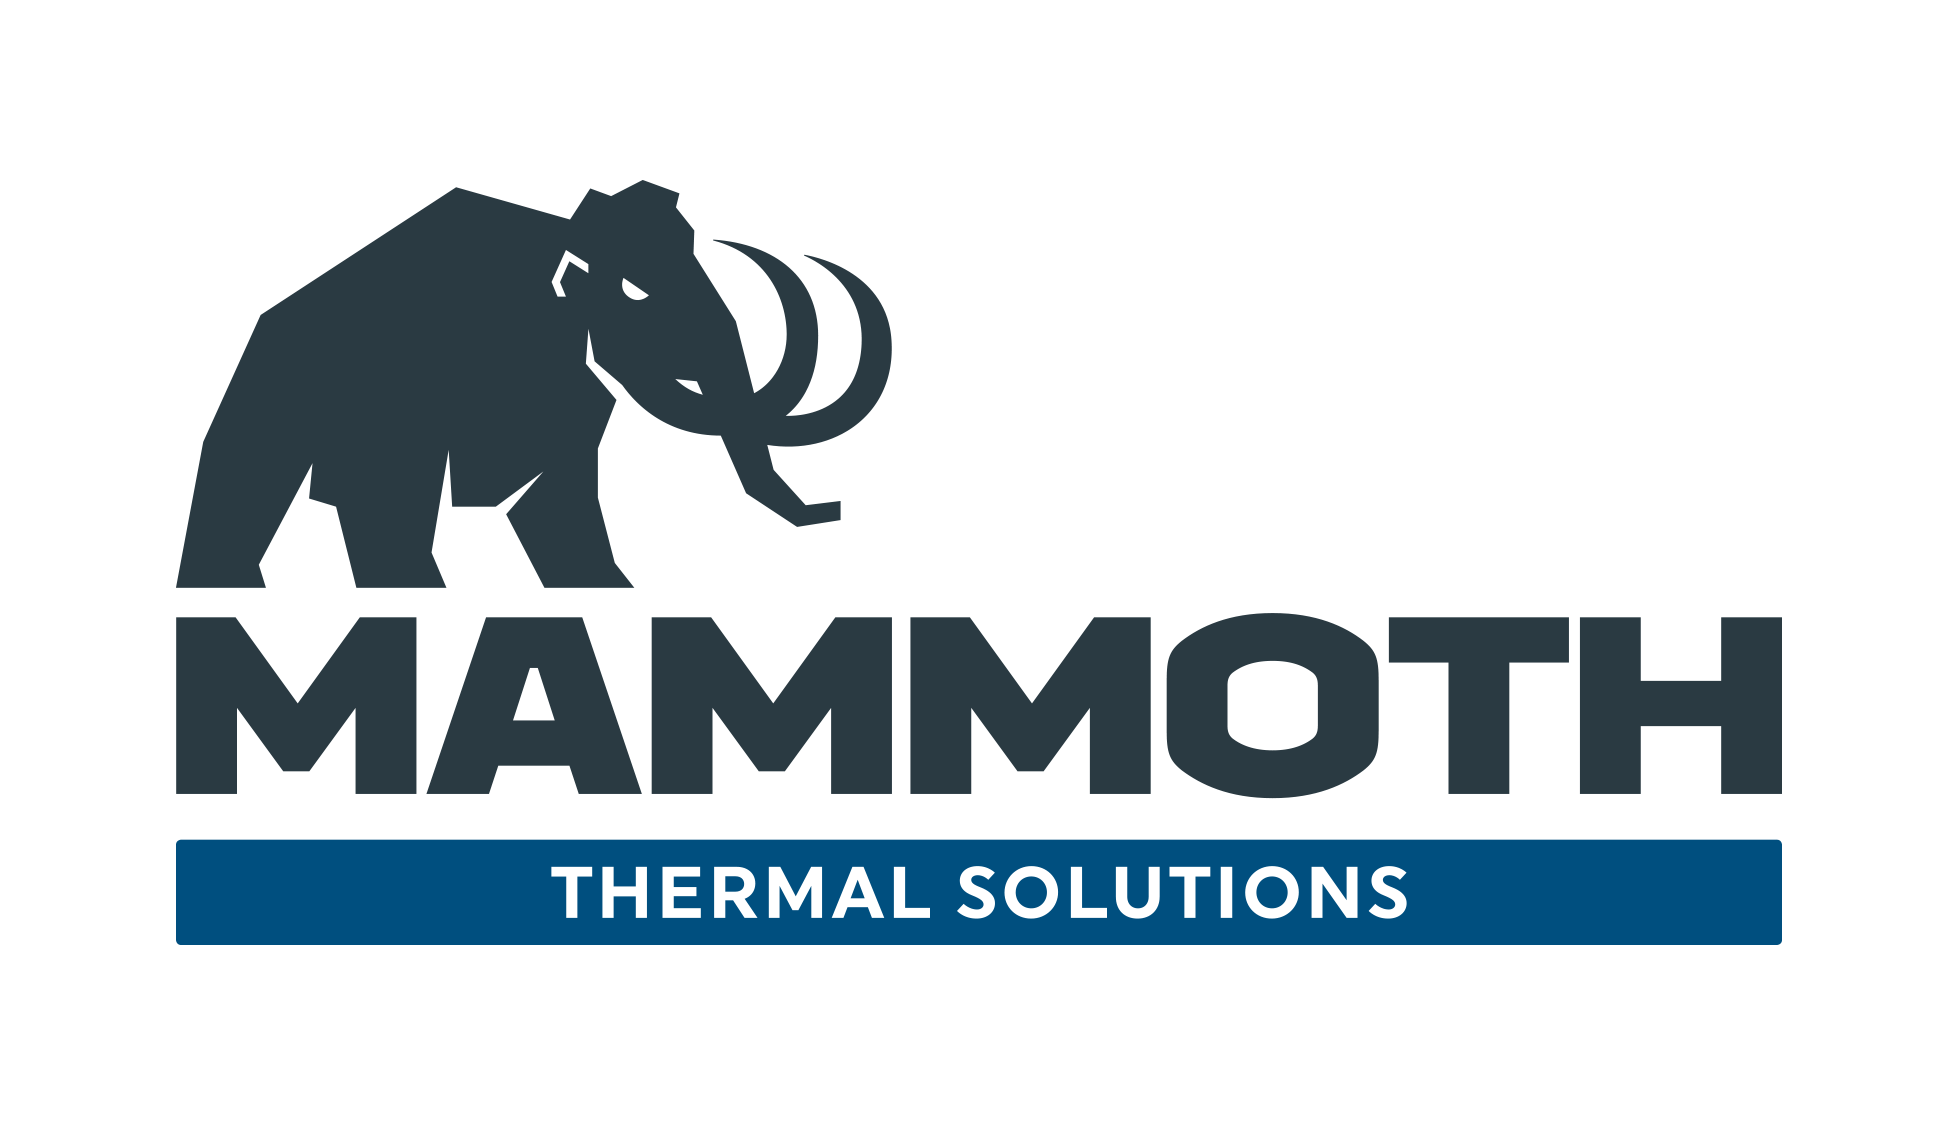 Thermal Solutions